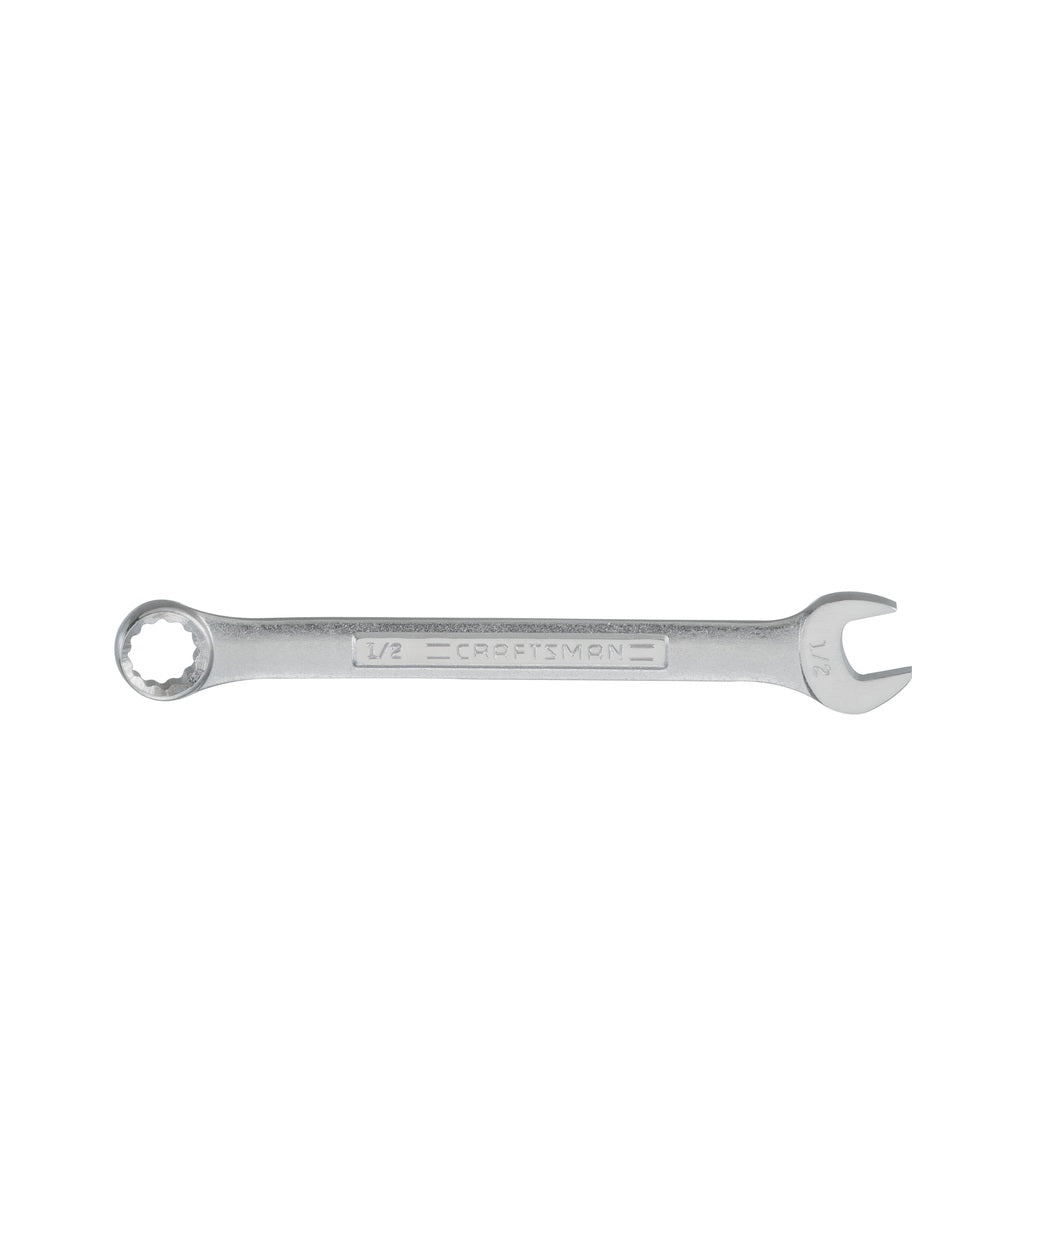 Craftsman CMMT44695 12 Point SAE Combination Wrench, 1/2 inch